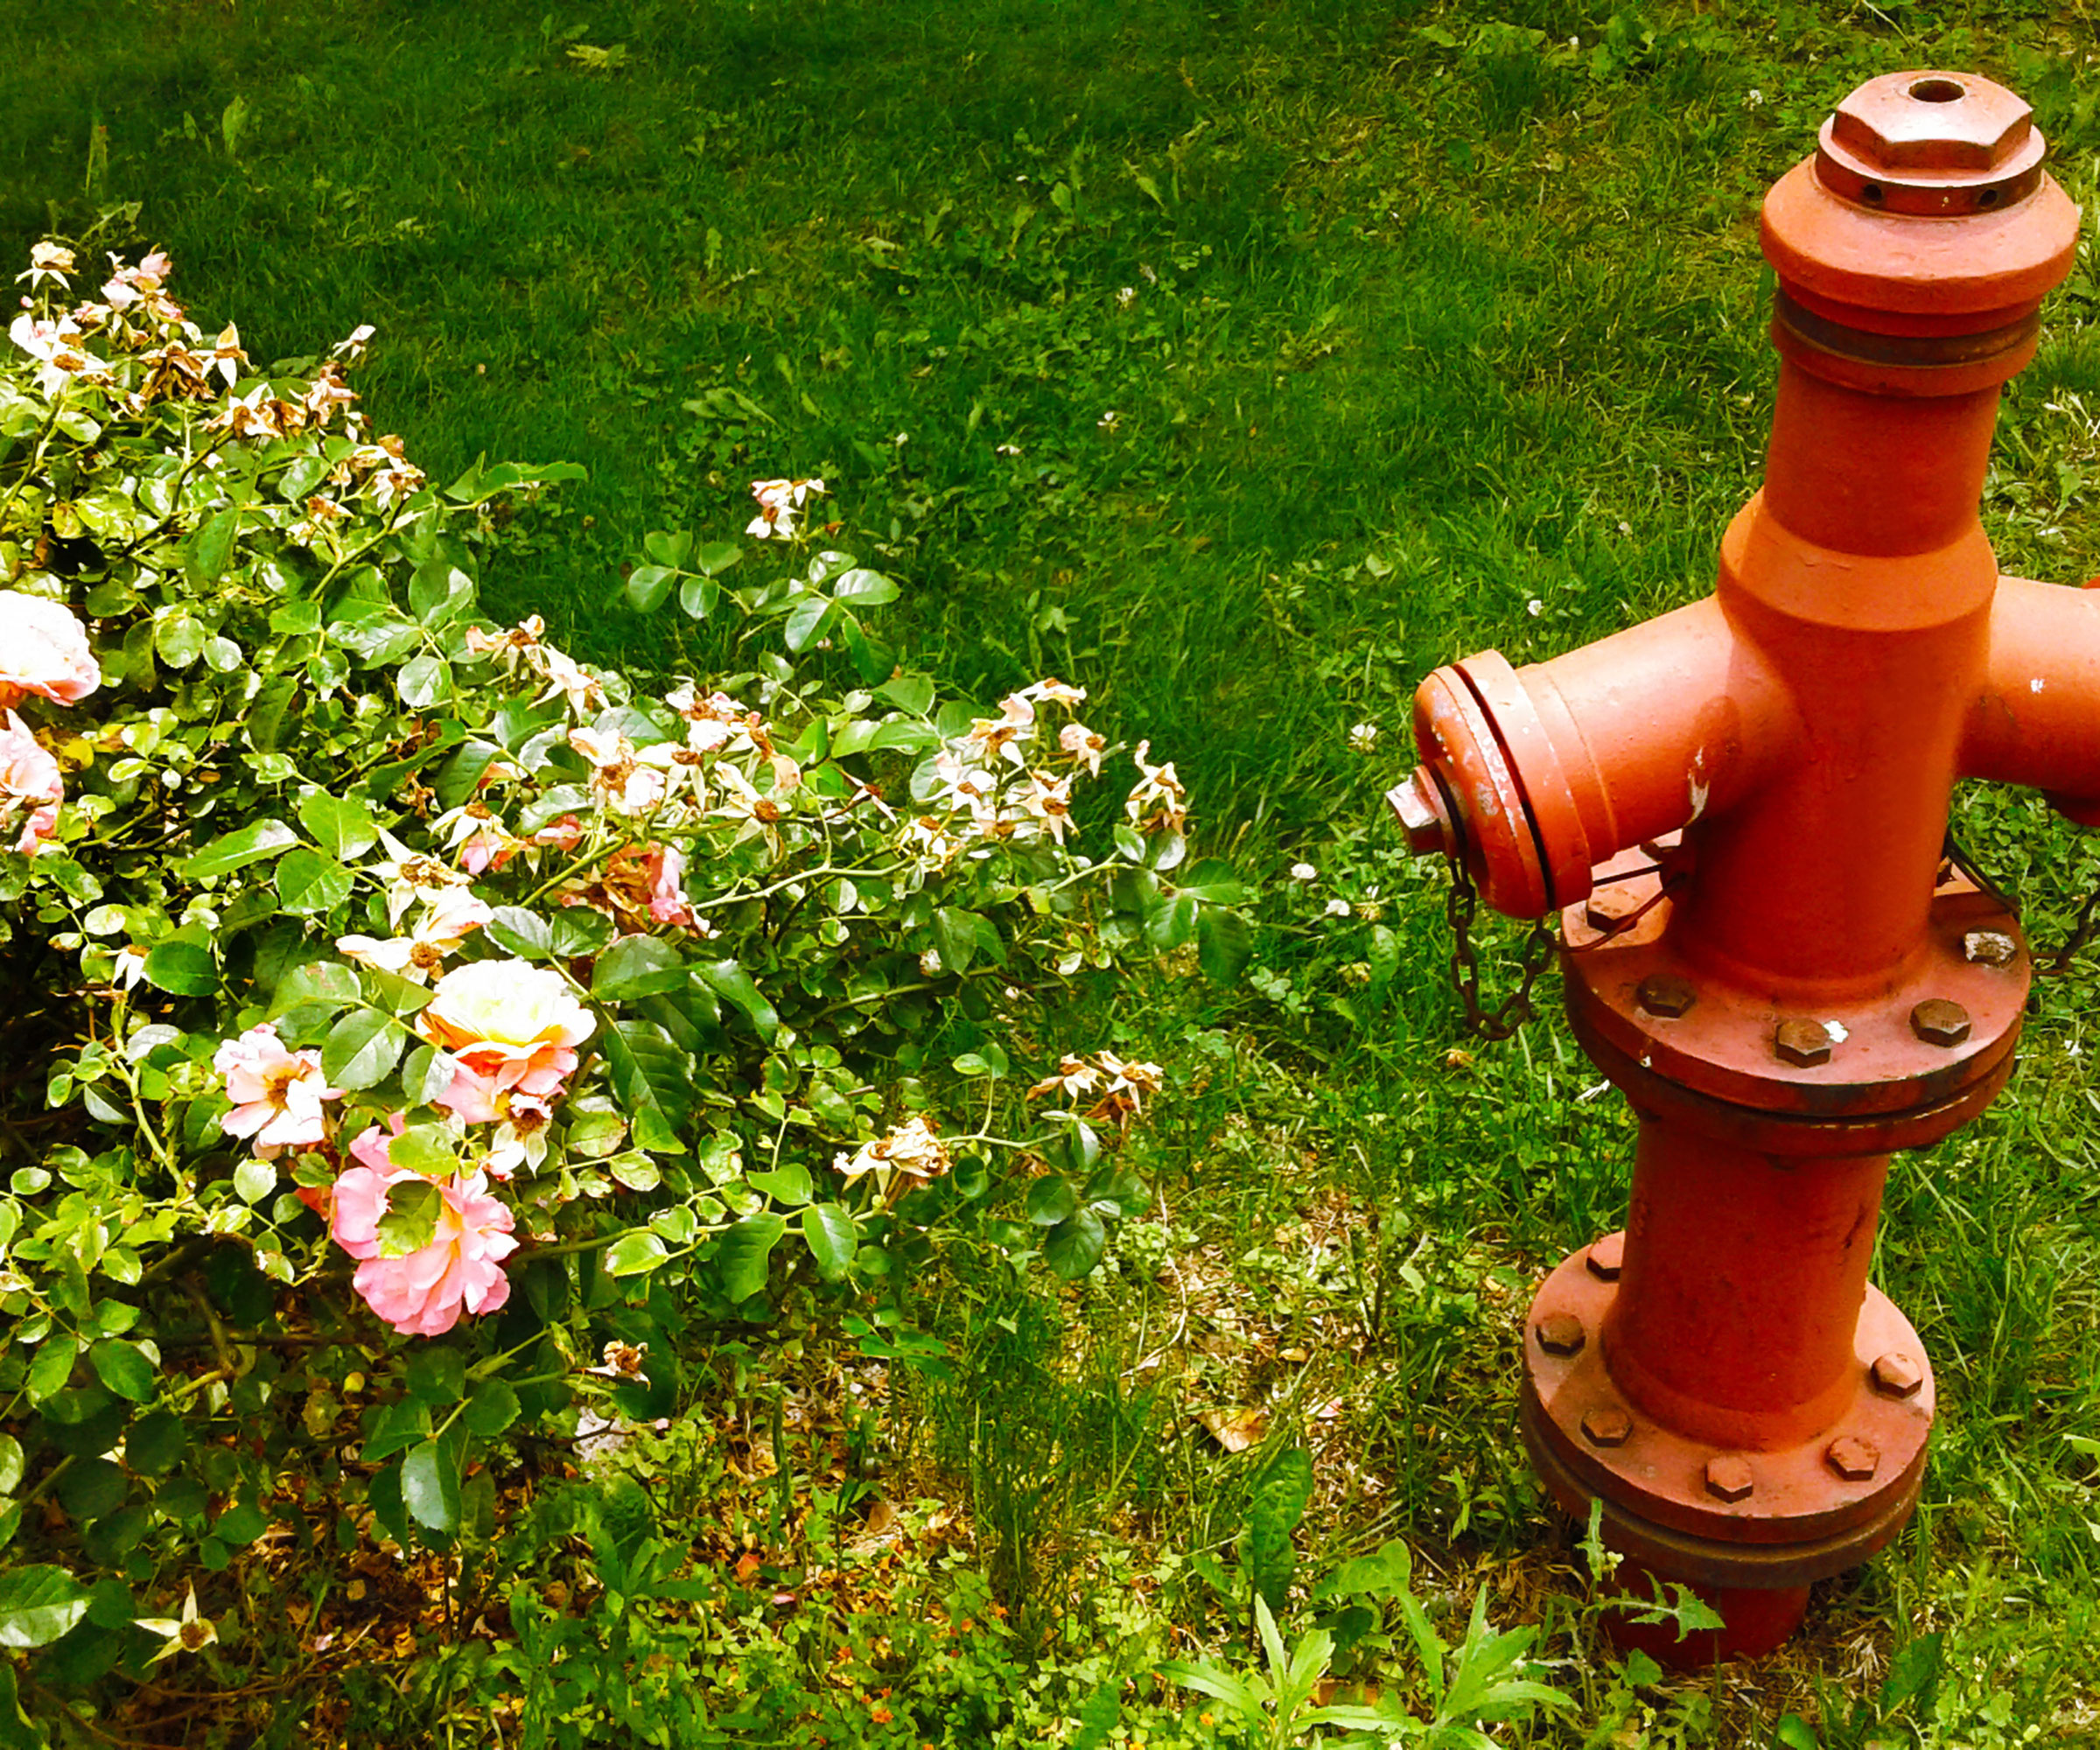 fire hydrant with nearby rose bush